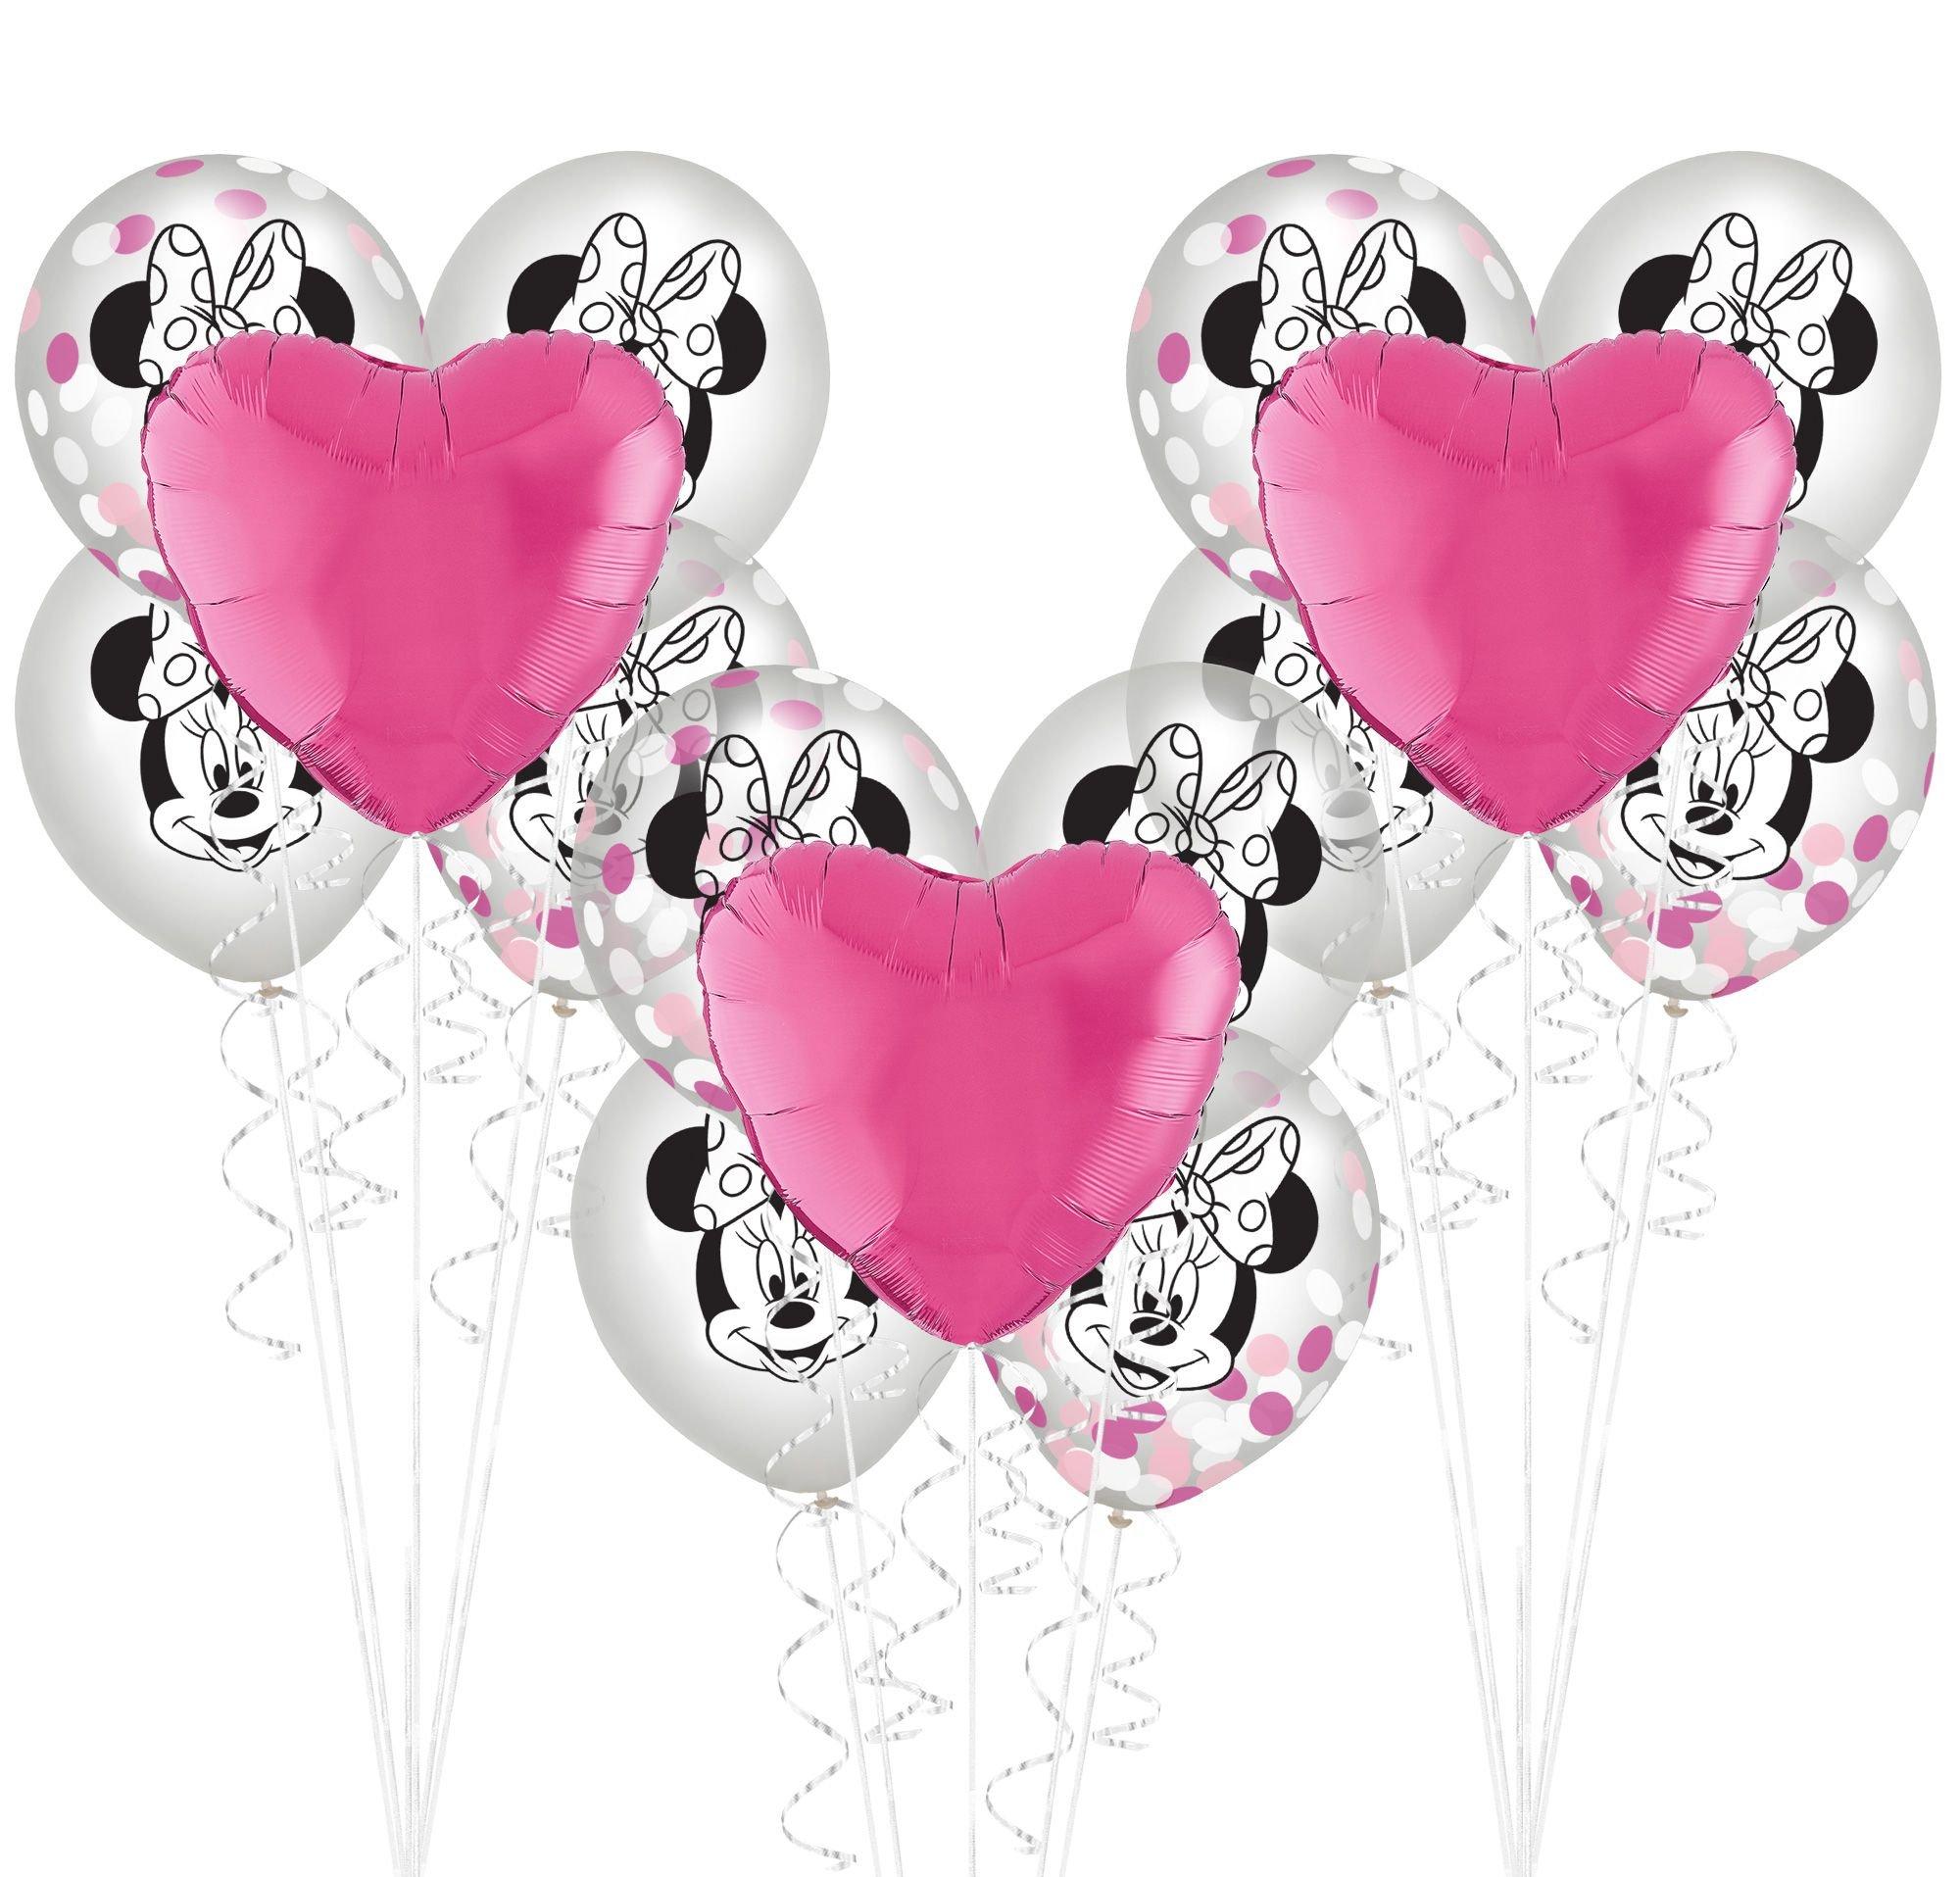 Minnie Mouse Forever Balloon Bouquet Supplies Pack - Kit Includes Heart Foil Balloons & Themed Latex Confetti Balloons